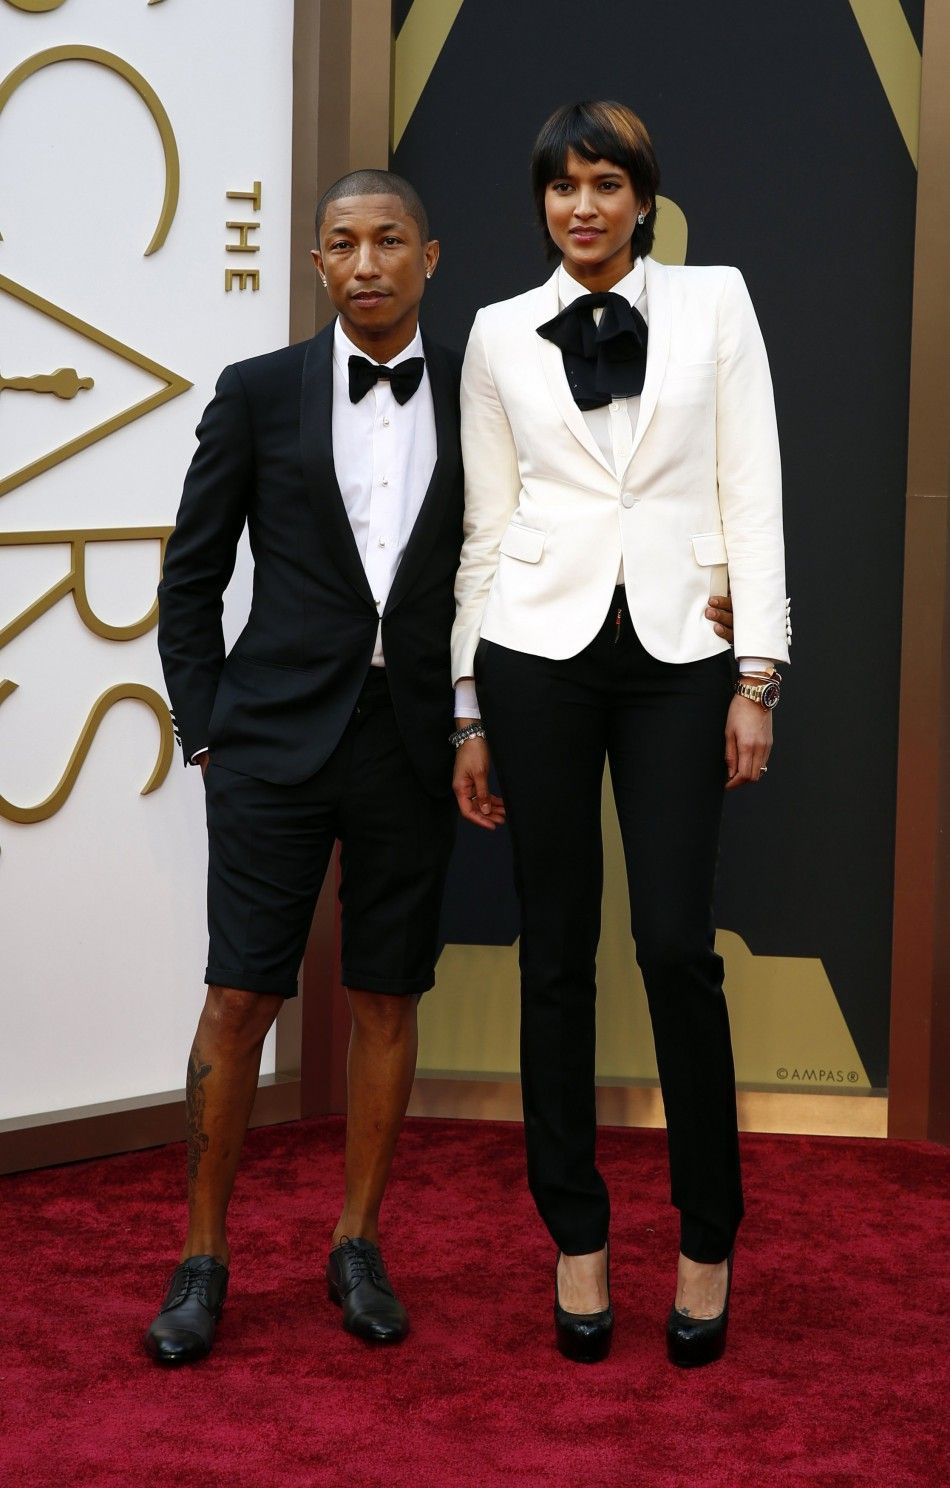 Pharrell WIlliams, wearing a Lanvin suit with wife Helen Lasichanh attend the Governors Ball after the 86th Academy Awards in Hollywood